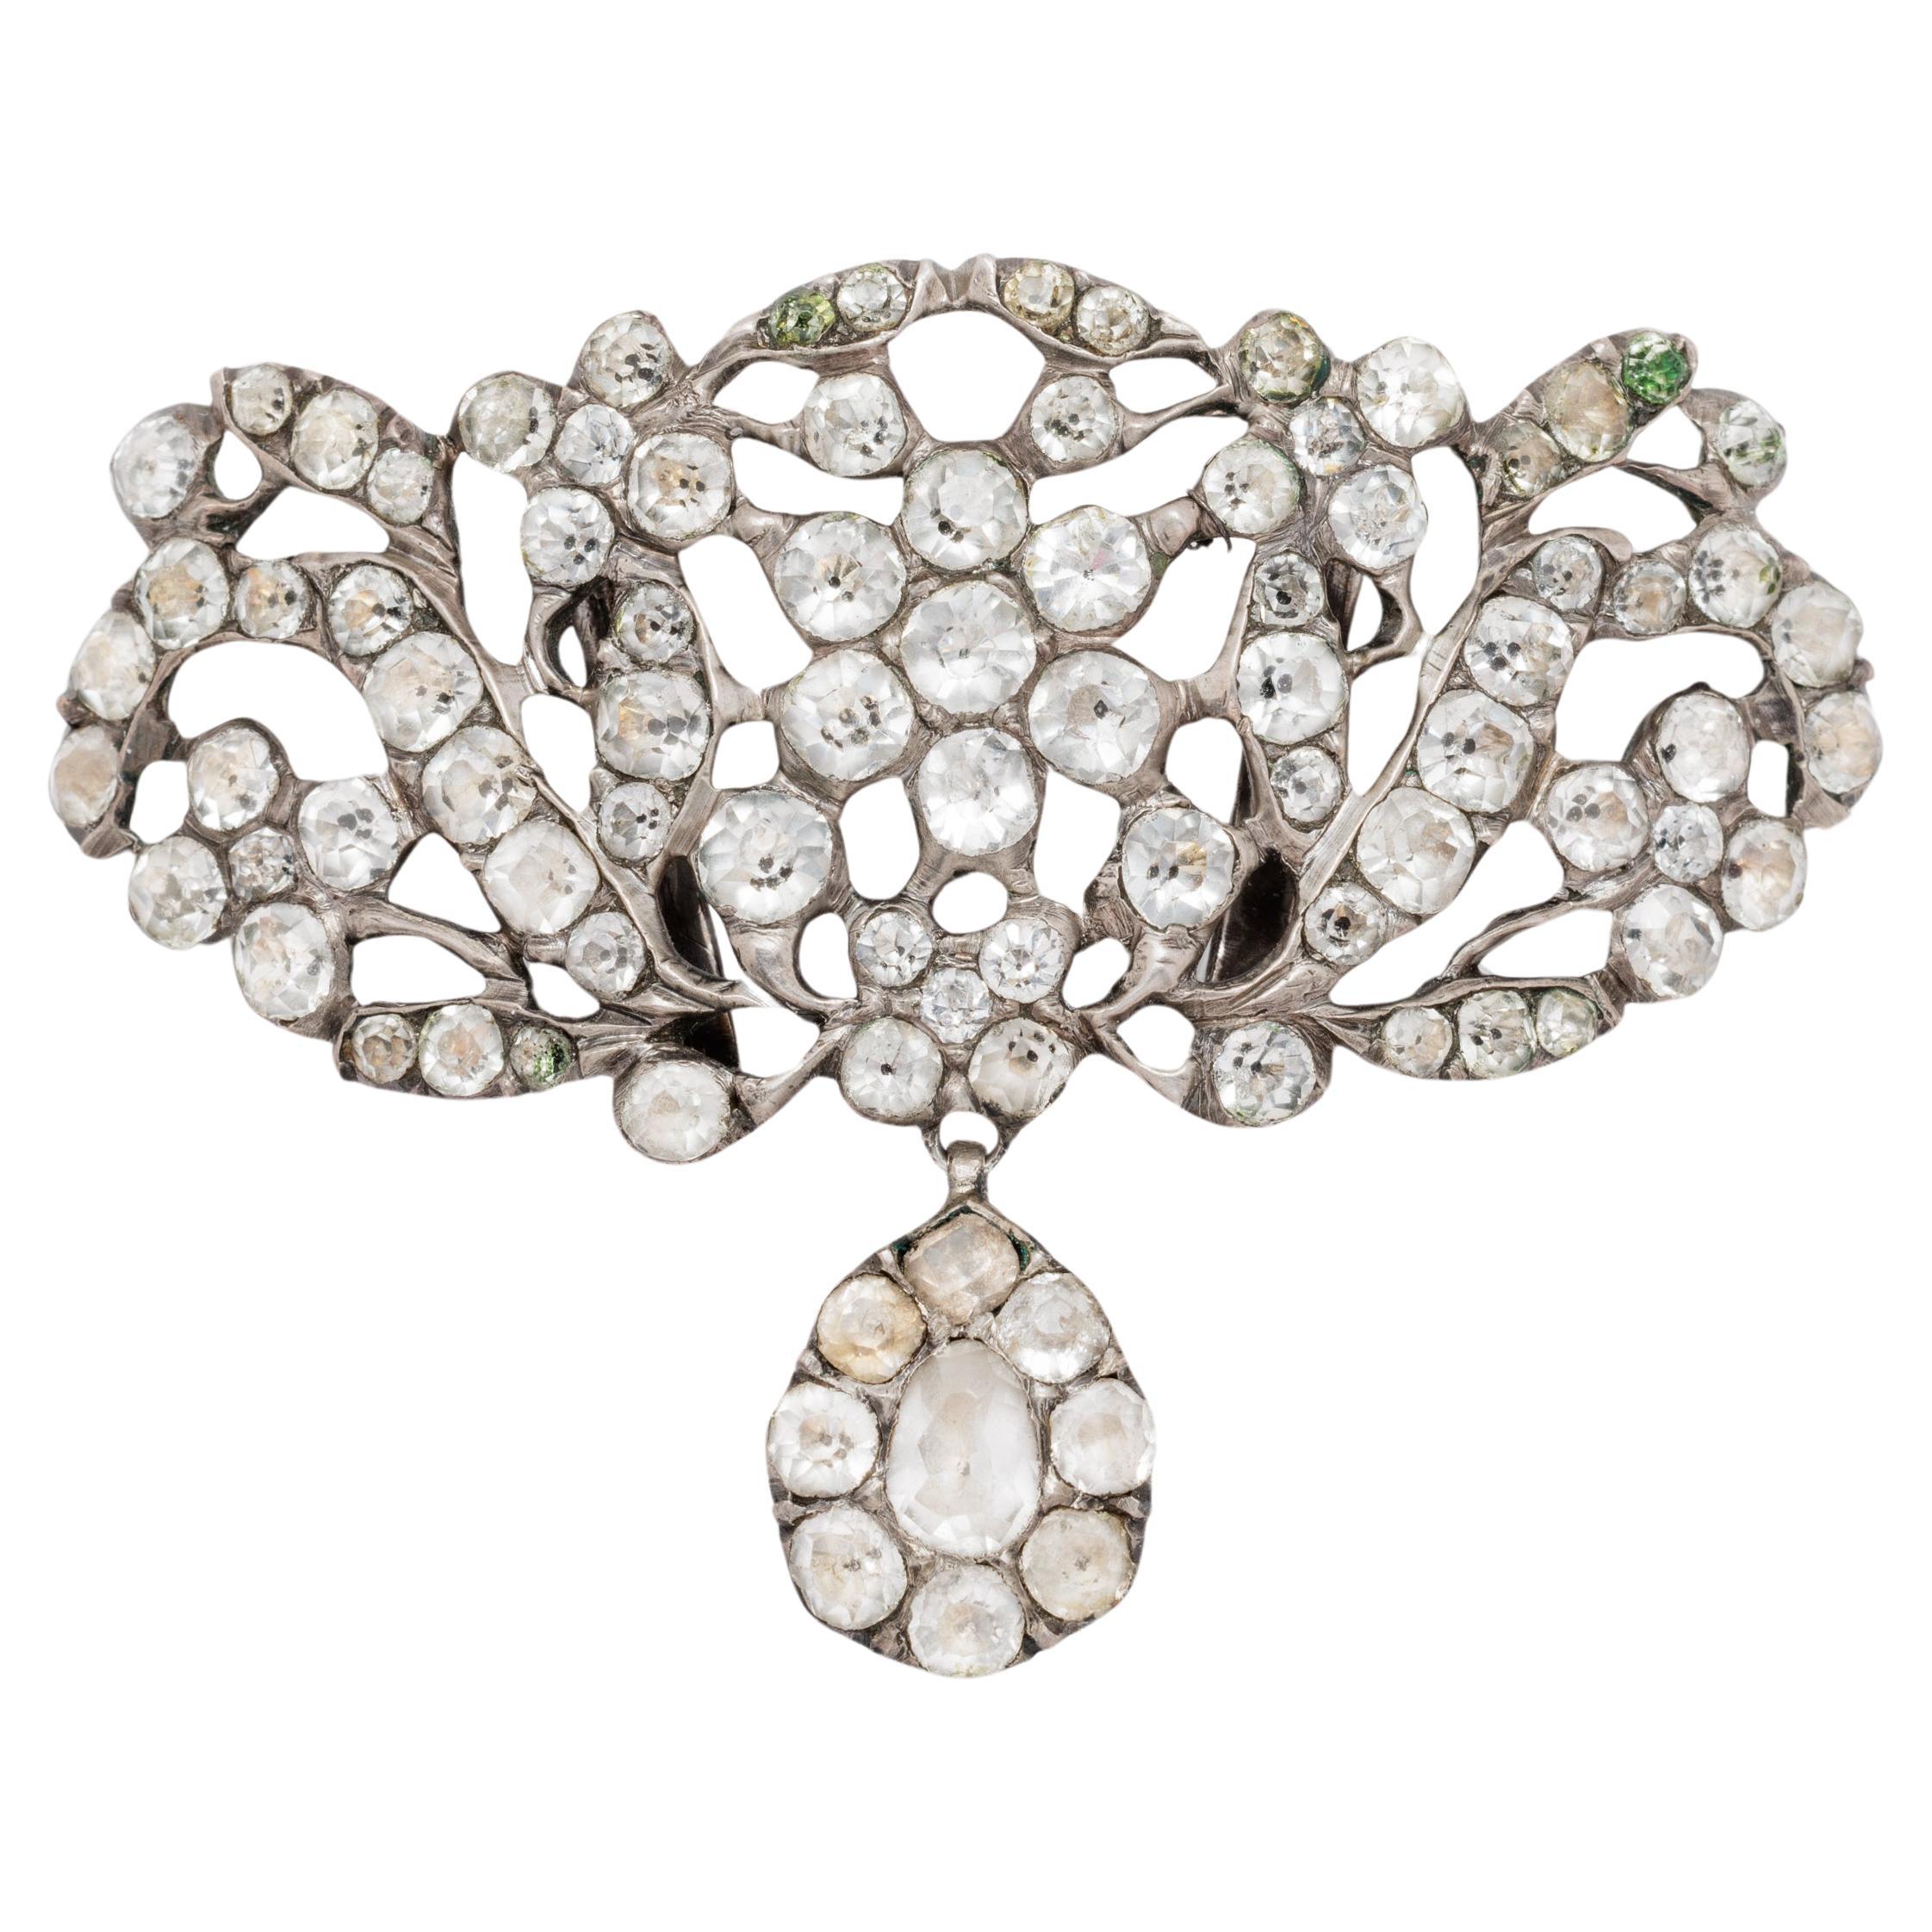 19th Century French Paste Cut Glass and Silver Opulent Collar